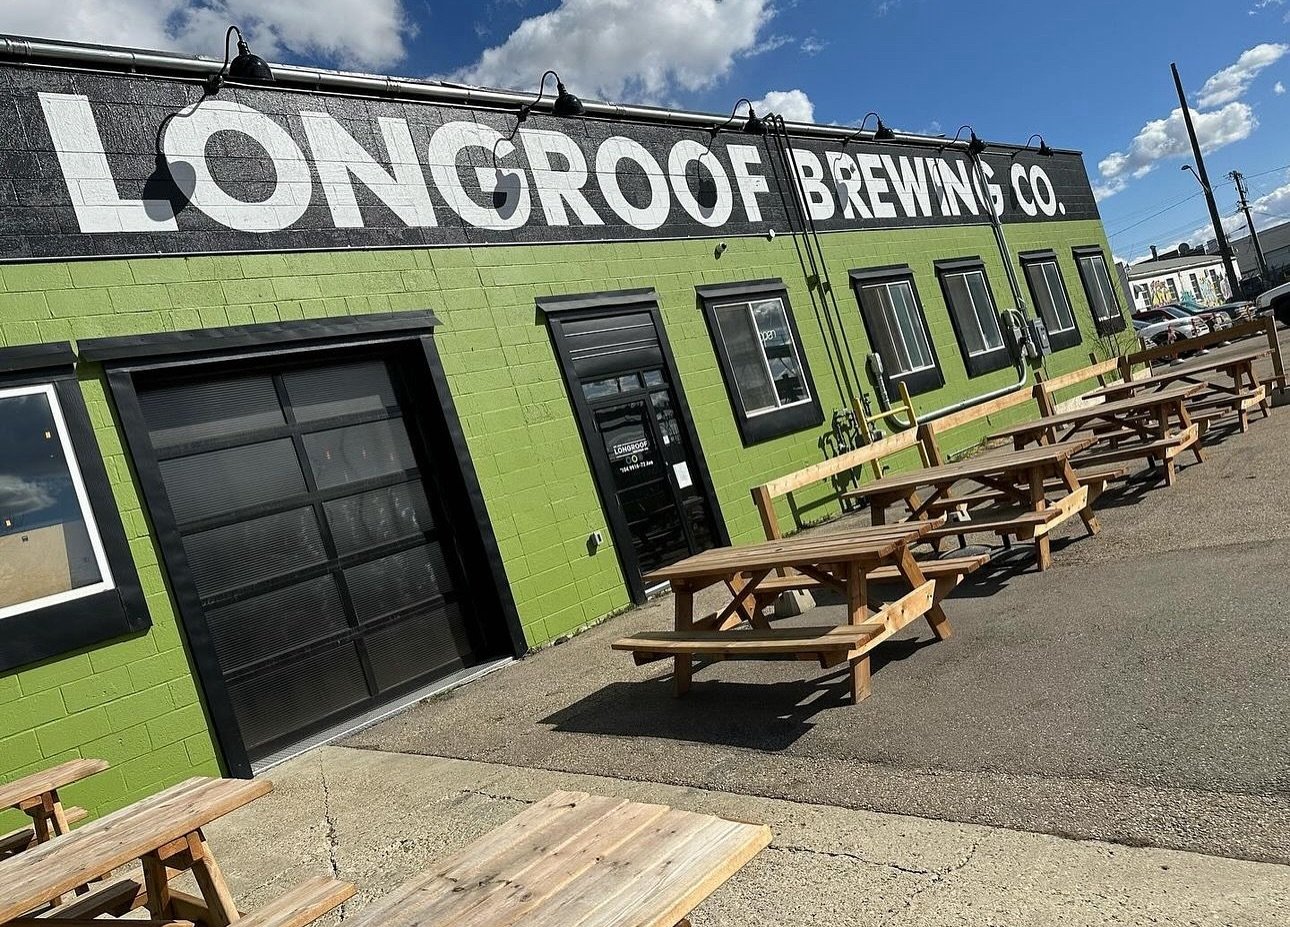 Friday at the taproom! 🍻

We are rolling into @longroofbrewing this evening, April 27th,  from 6-9pm for patio pints and tacos!

Come the a load off with us 🌮

#elmeromerotaqueriayeg #yegfood #yegbrewery #yegfoodtrucks #foodtrucks #tacotruck